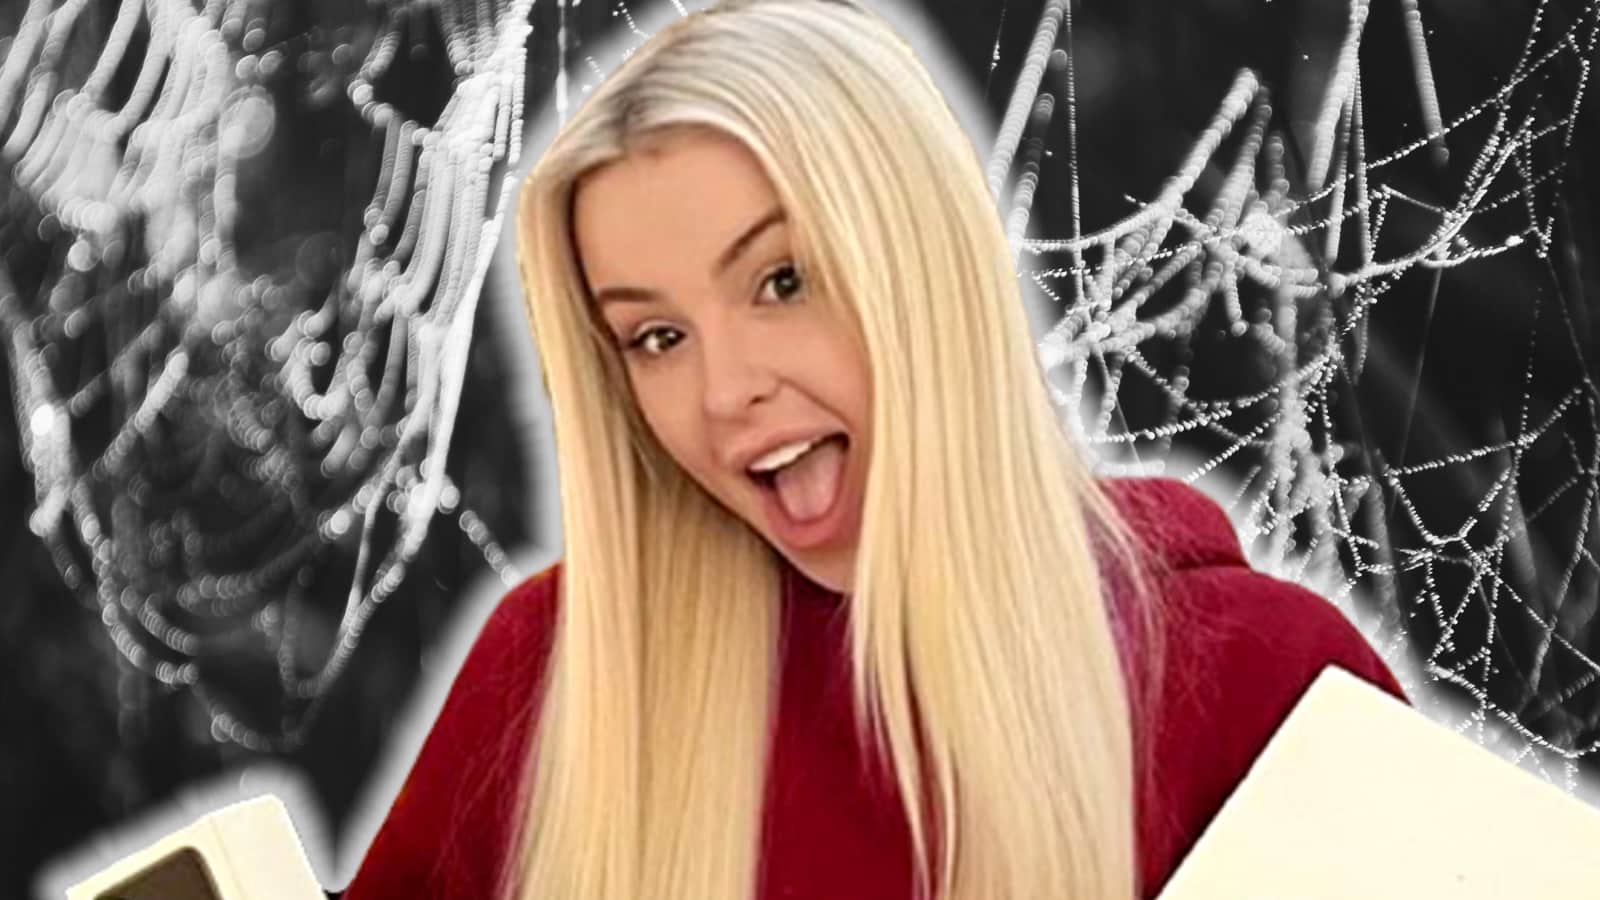 Tana Mongeau in front of a cobweb